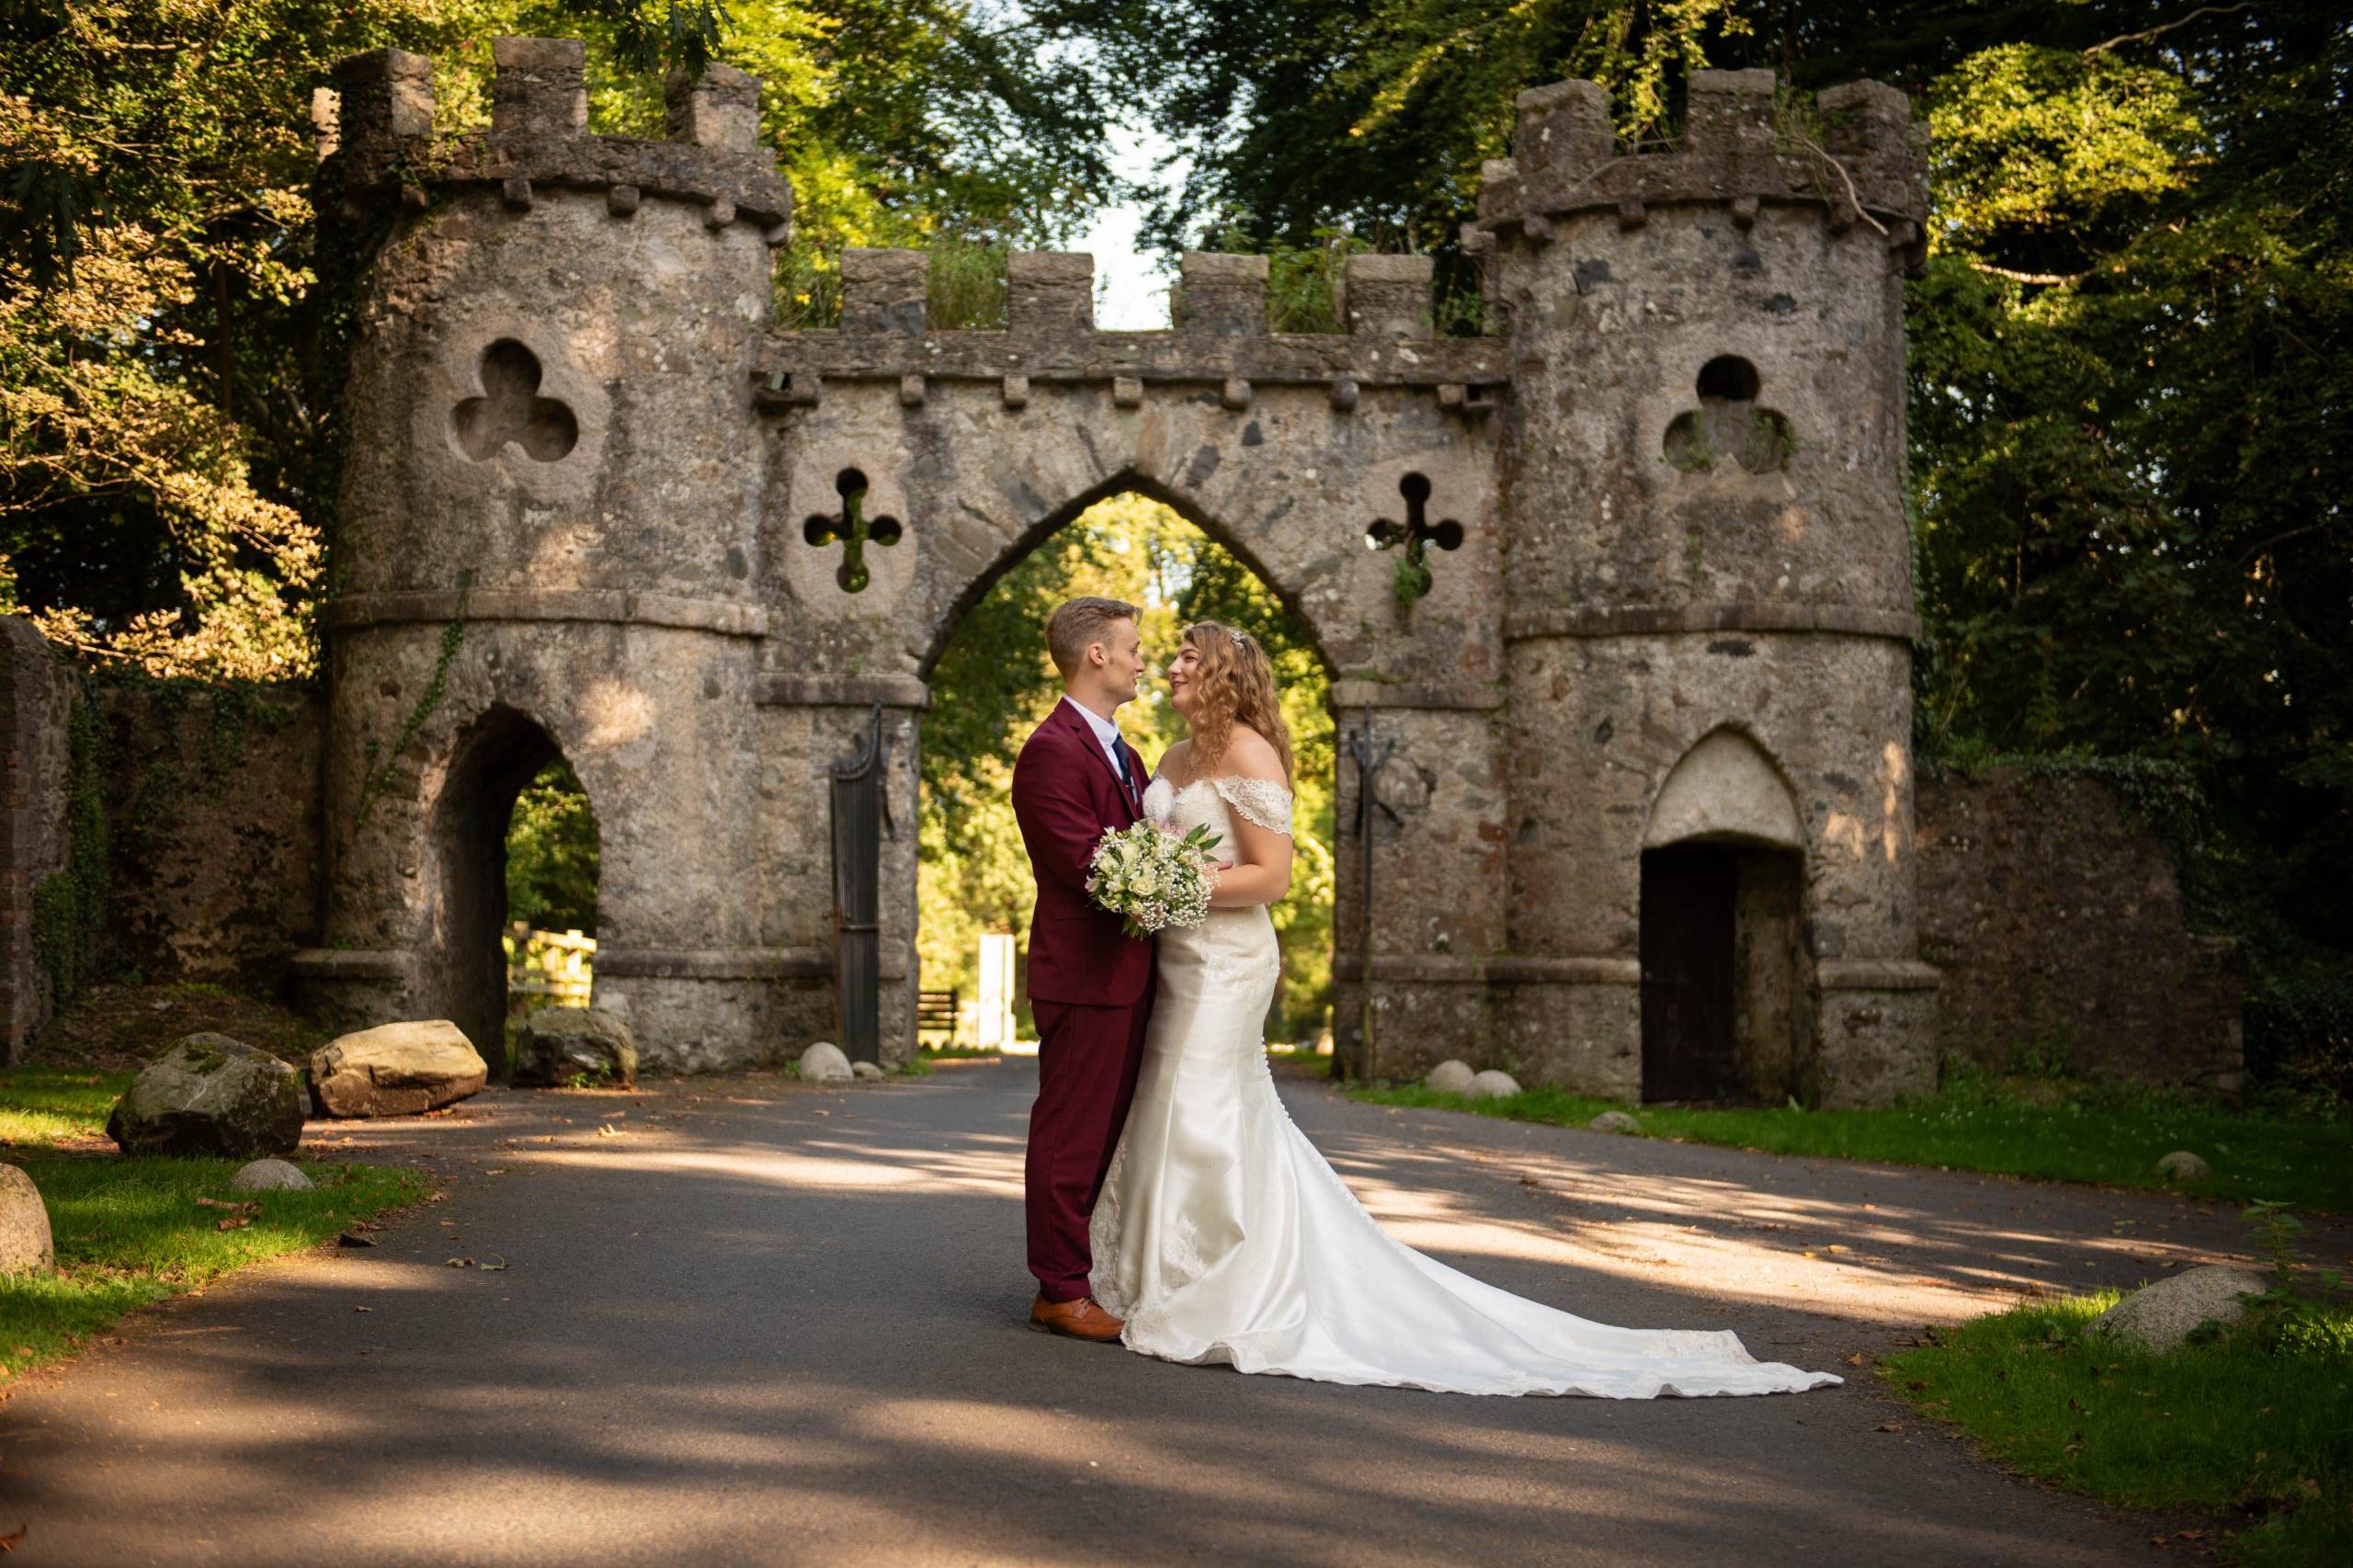 Bride & Groom embrace on the driveaway up to the beautiful archway at Tollymore Forest Park